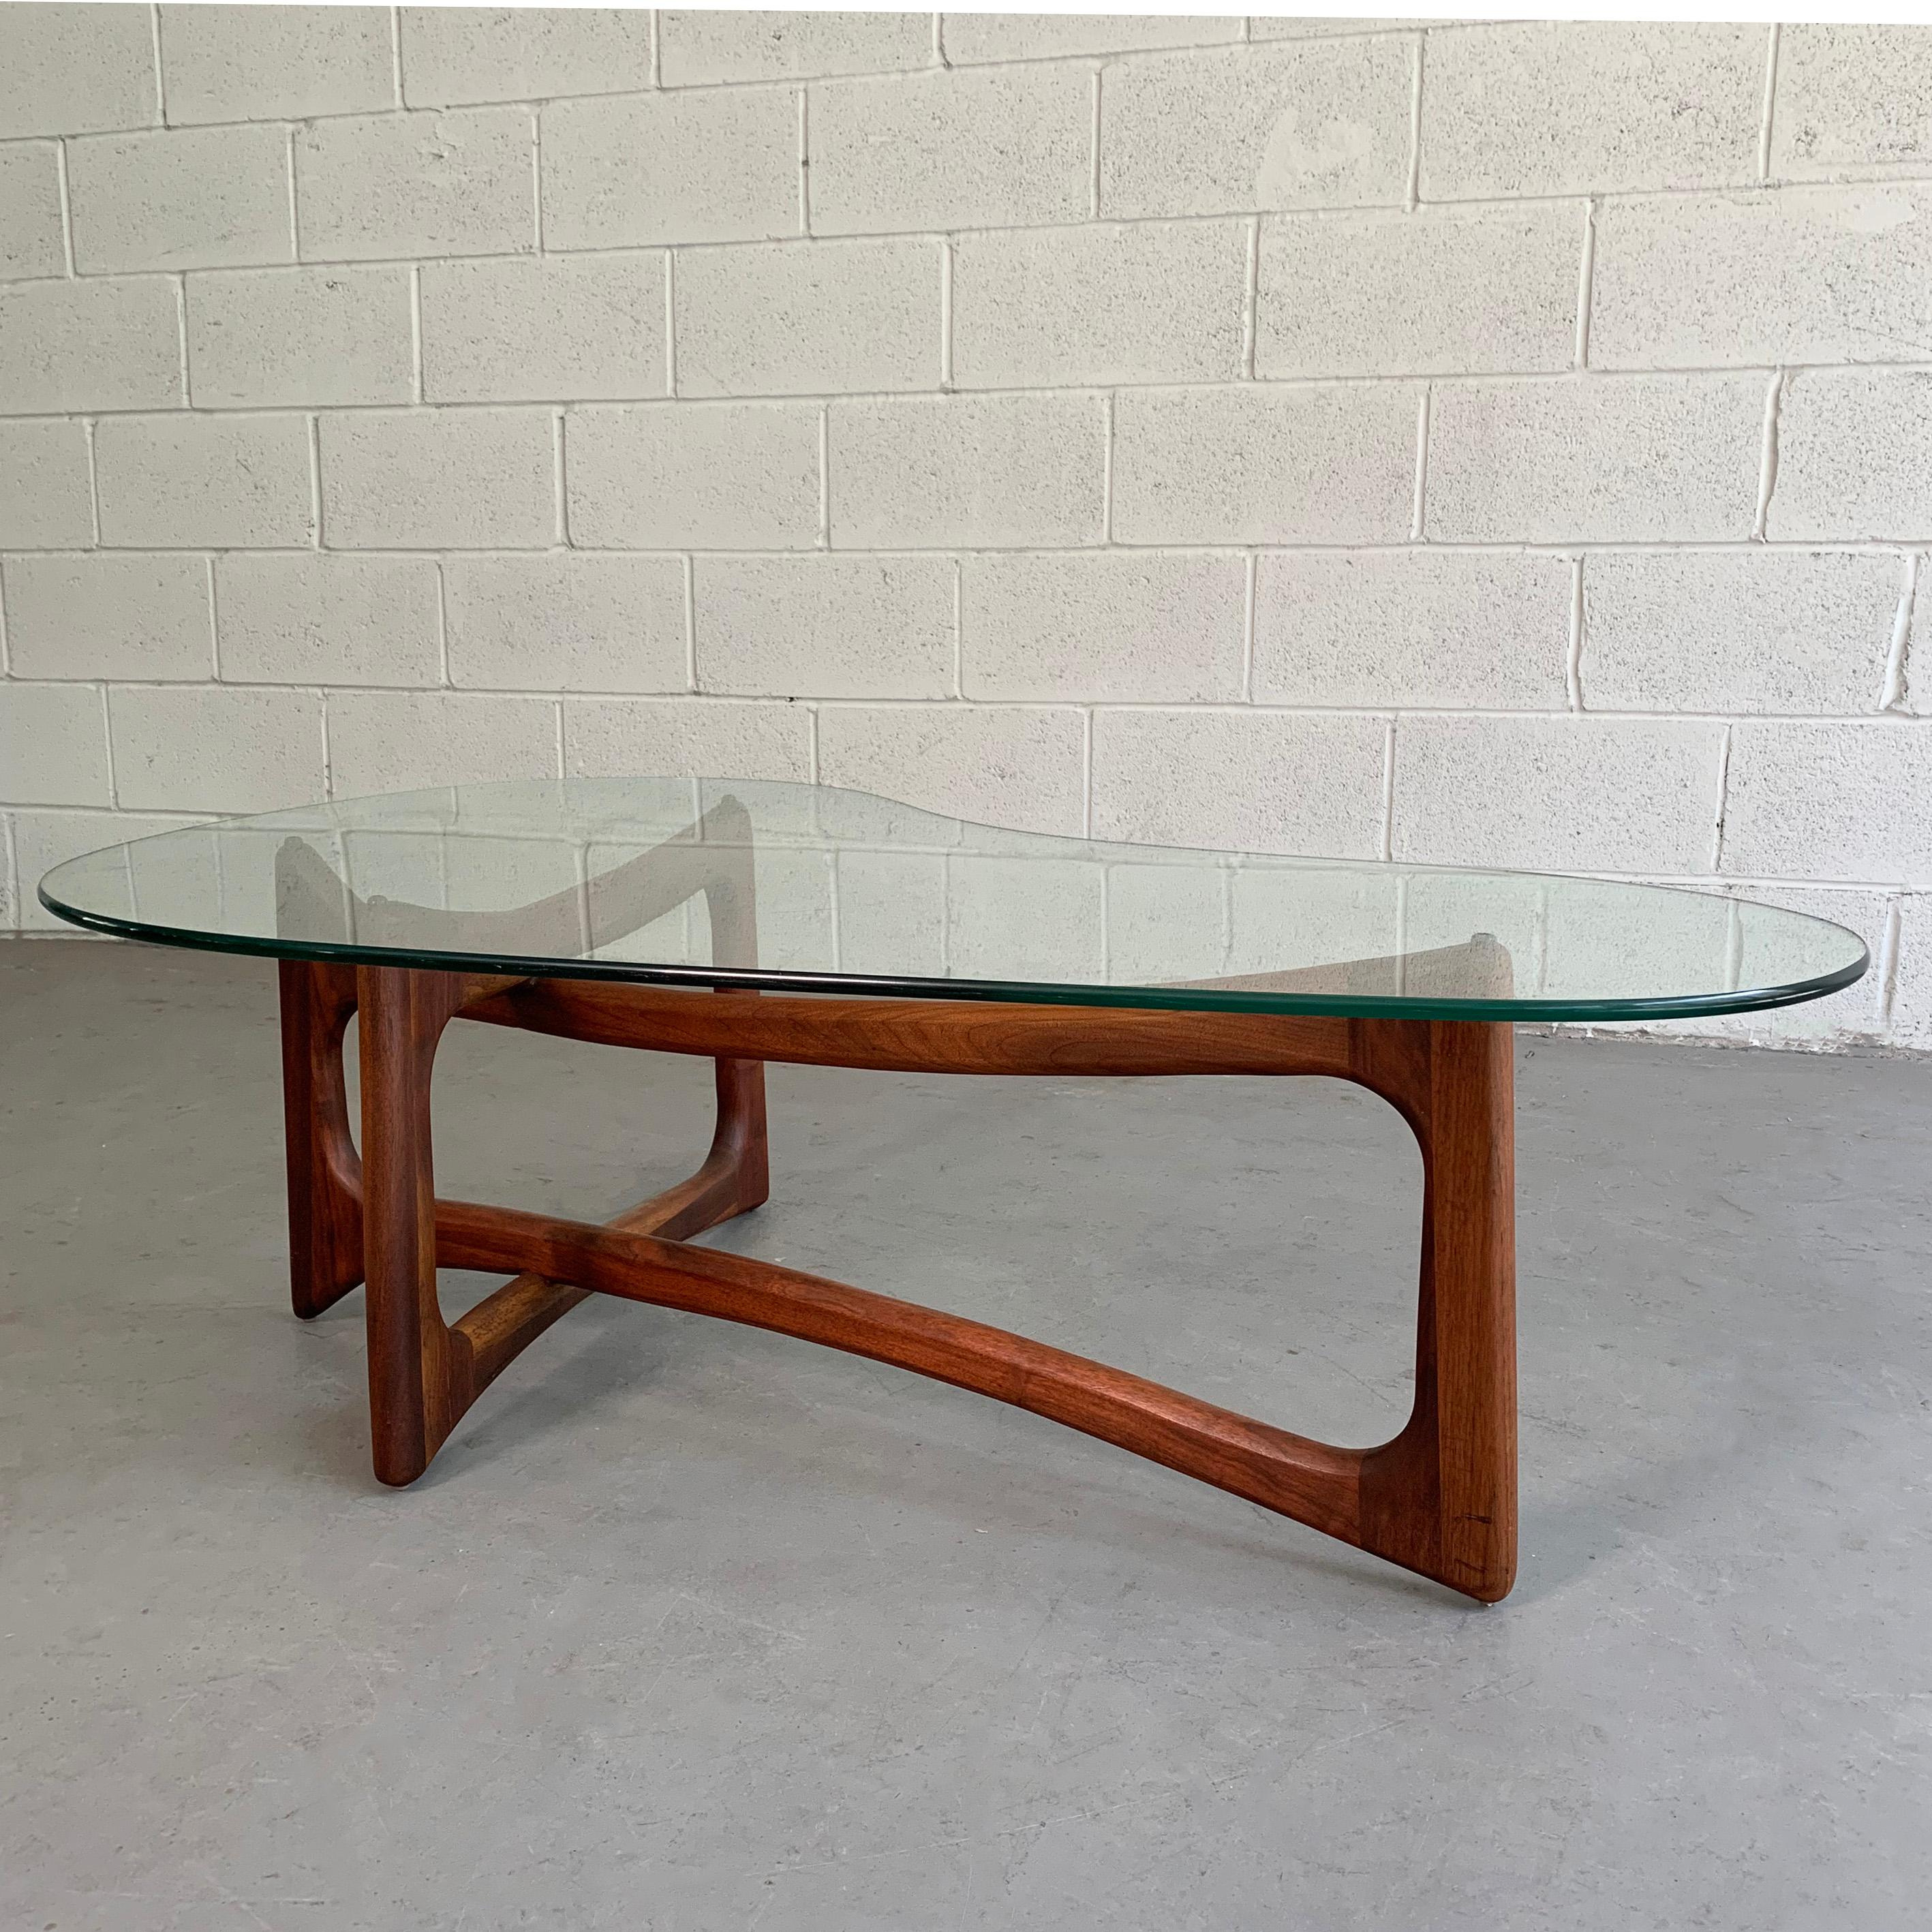 American Adrian Pearsall Sculptural Walnut and Glass Coffee Table